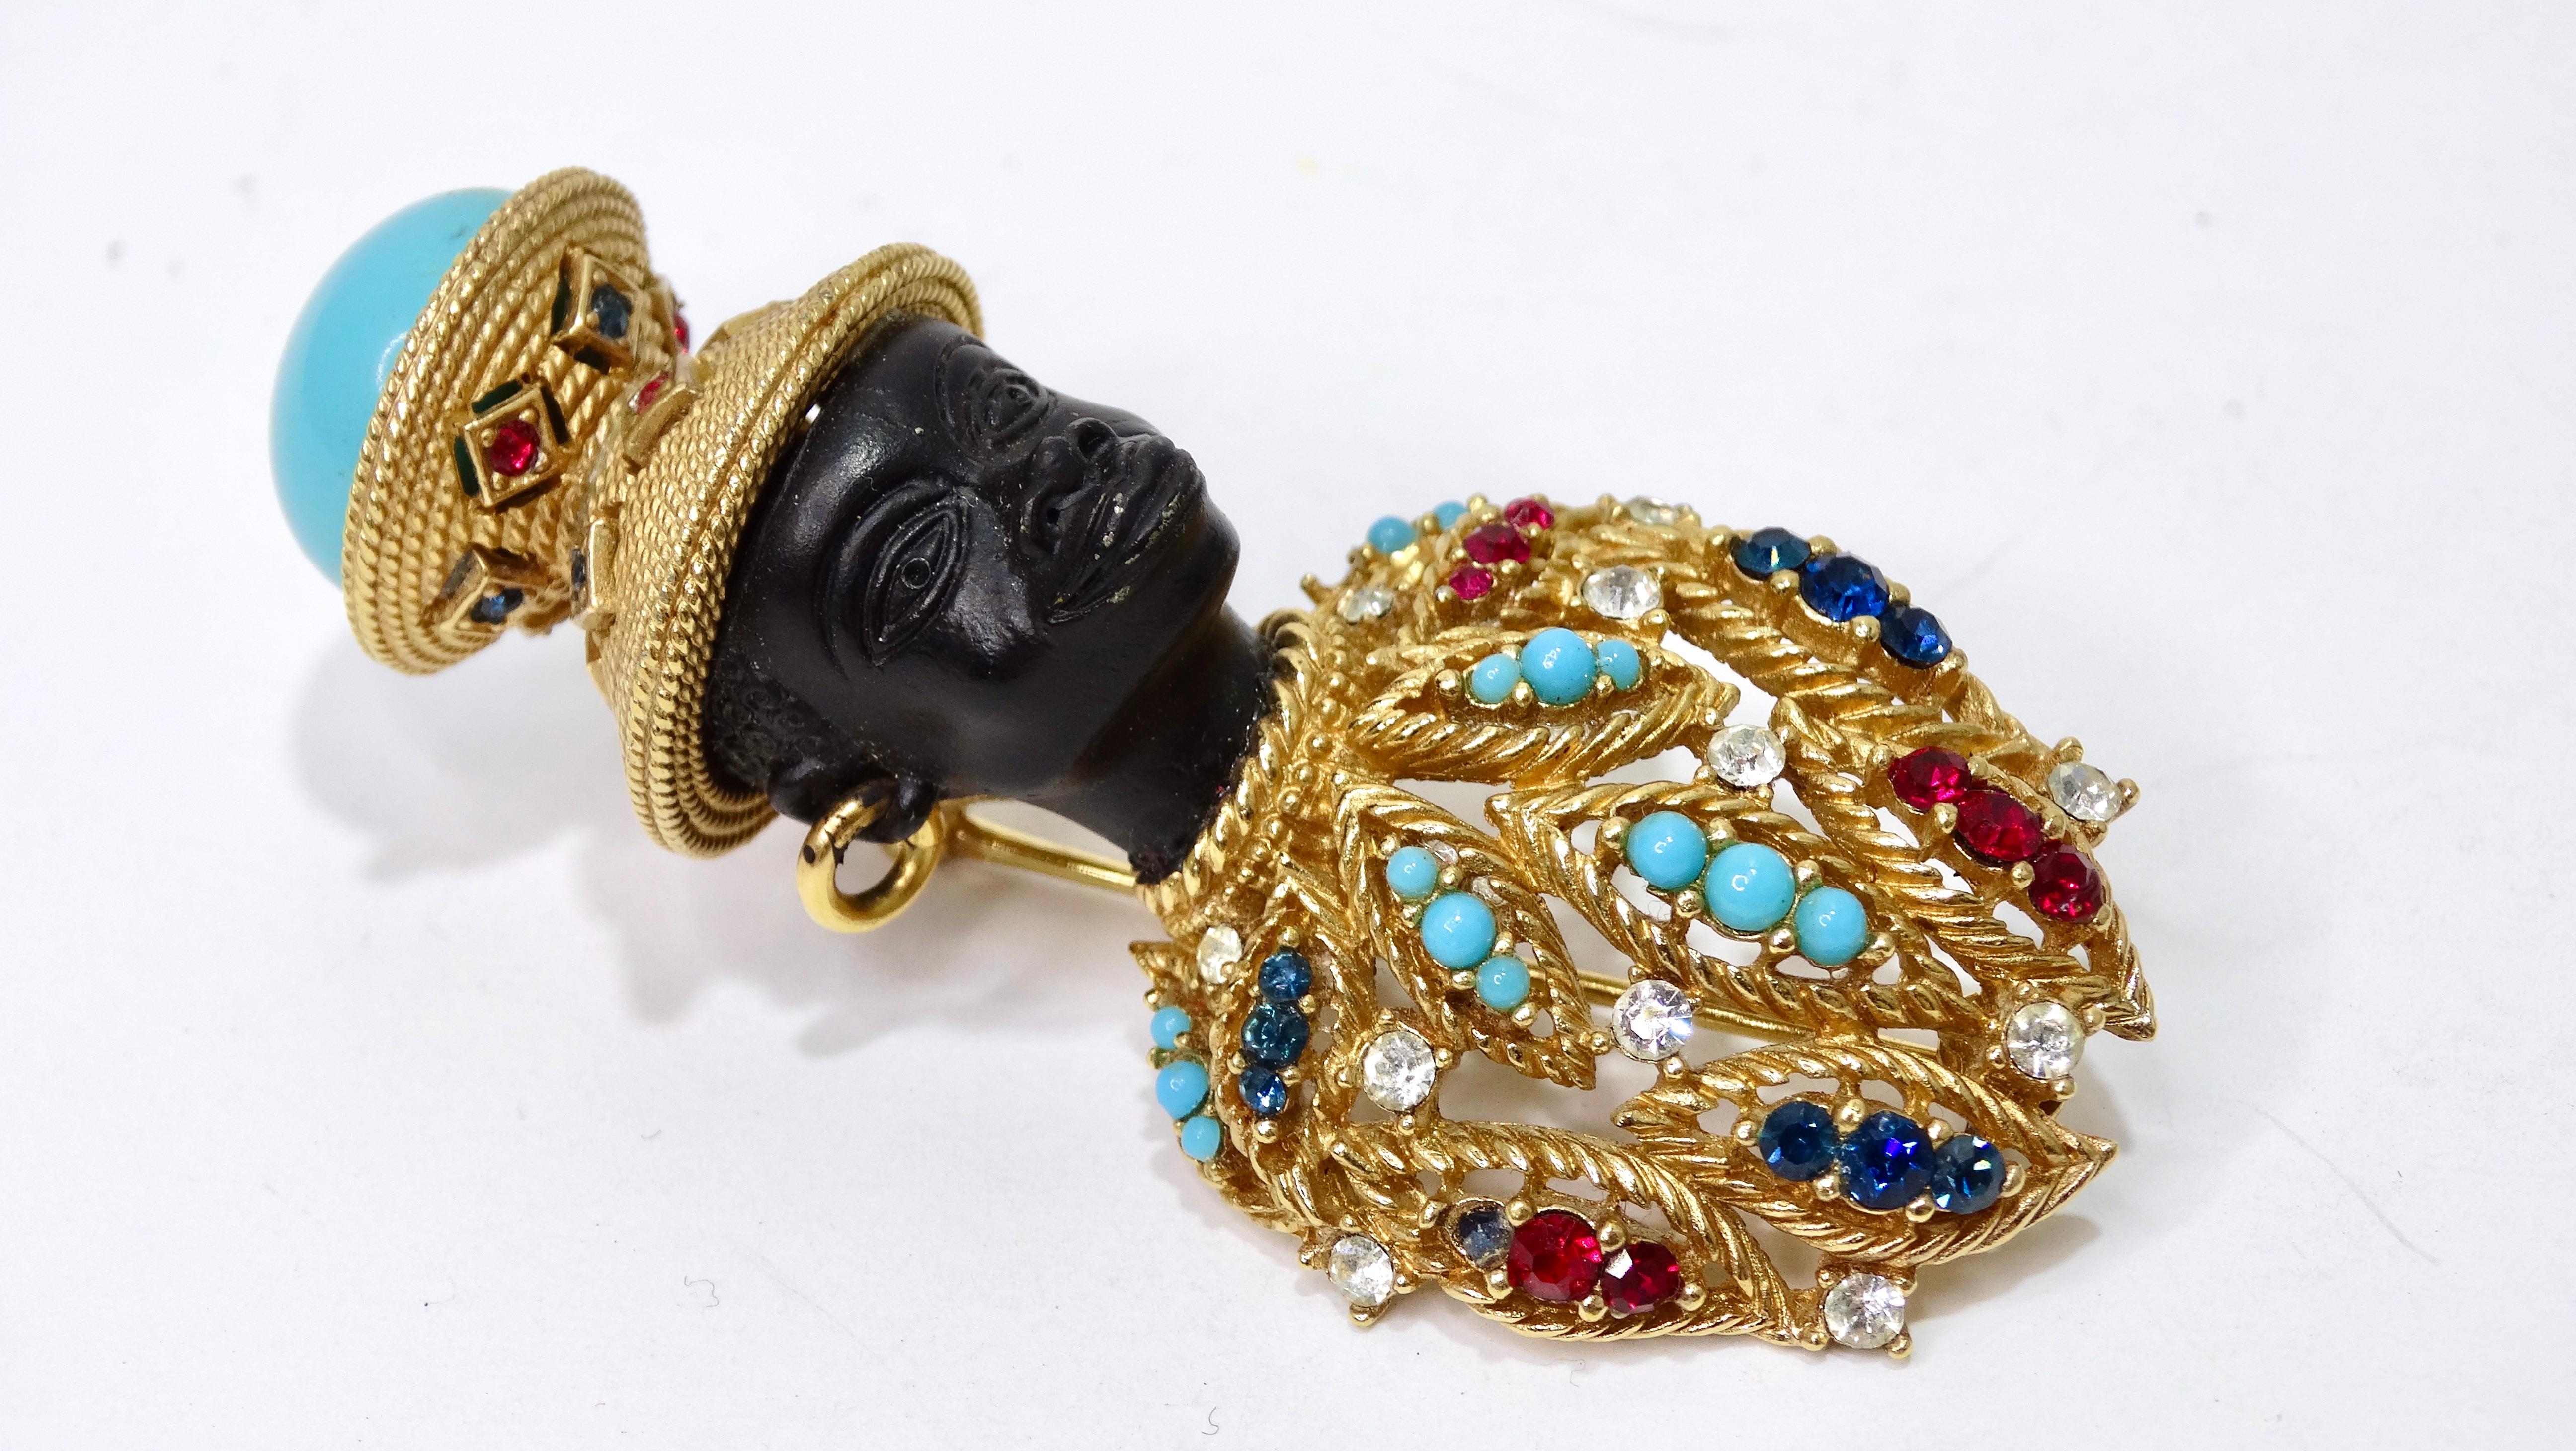 This piece is a stunningly detailed brooch! A beautiful vintage 1960s Venetian style Nubian brooch features gold-tone mounting, with faux carved head with gold-tone hoop earrings, large blue bead, and rhinestone jeweled front. Signed Ciner on the